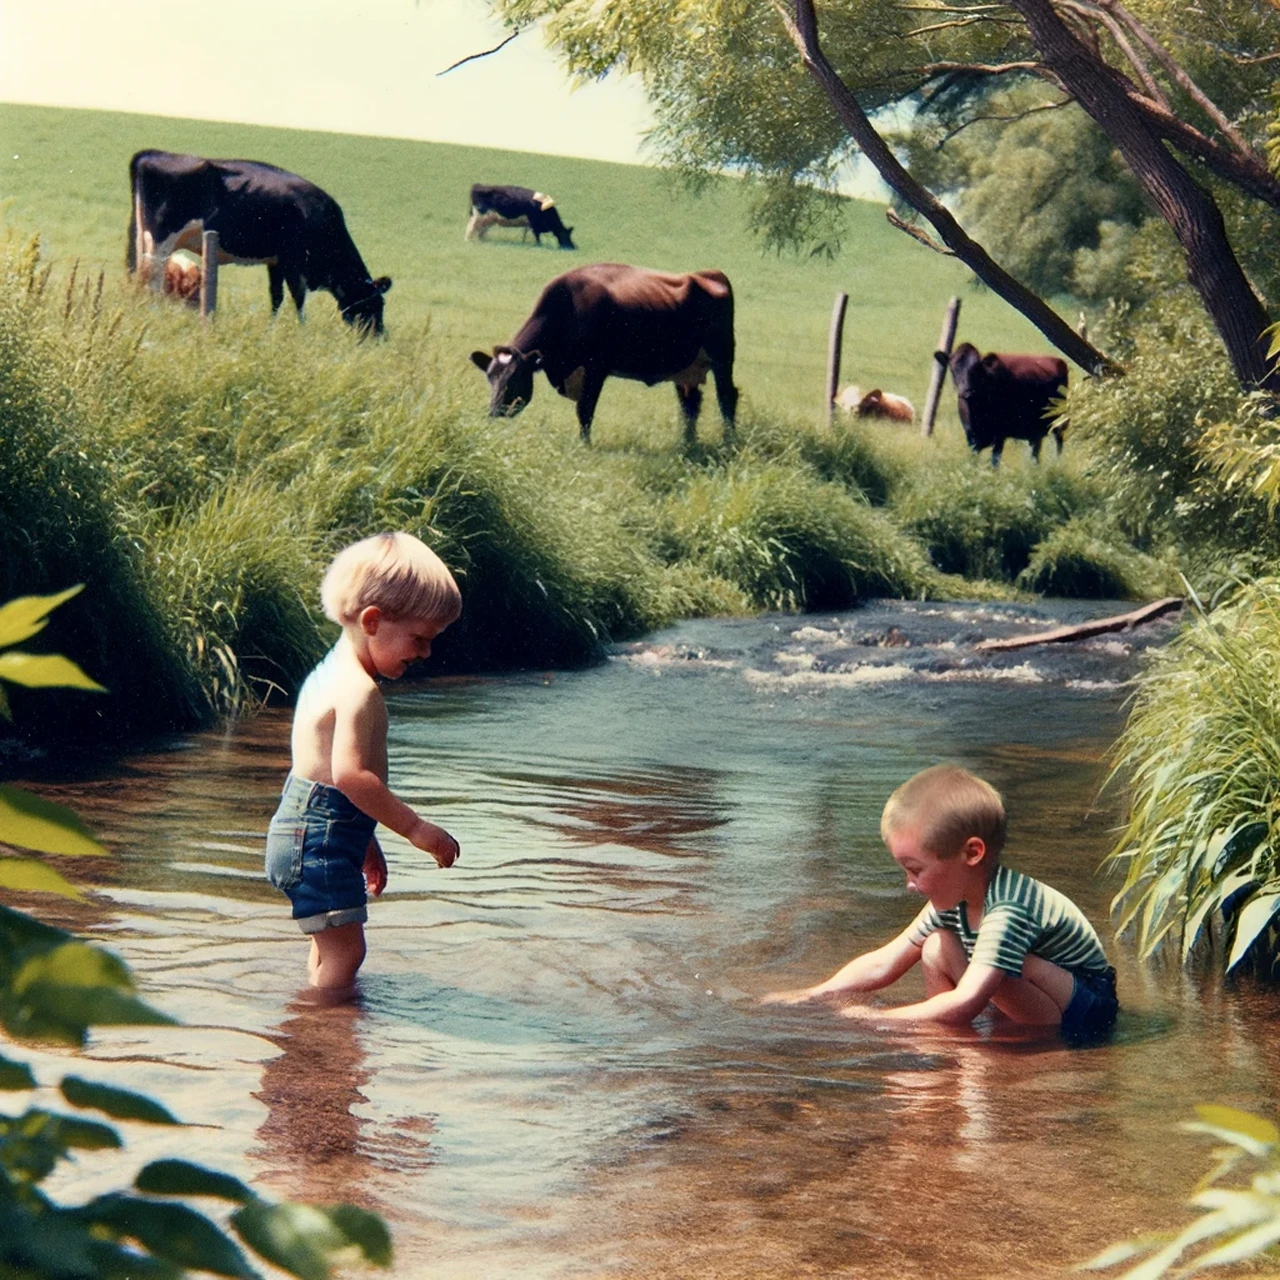 A photograph from the 1990's of two young boys playing in a creek surrounded by cattle pasture